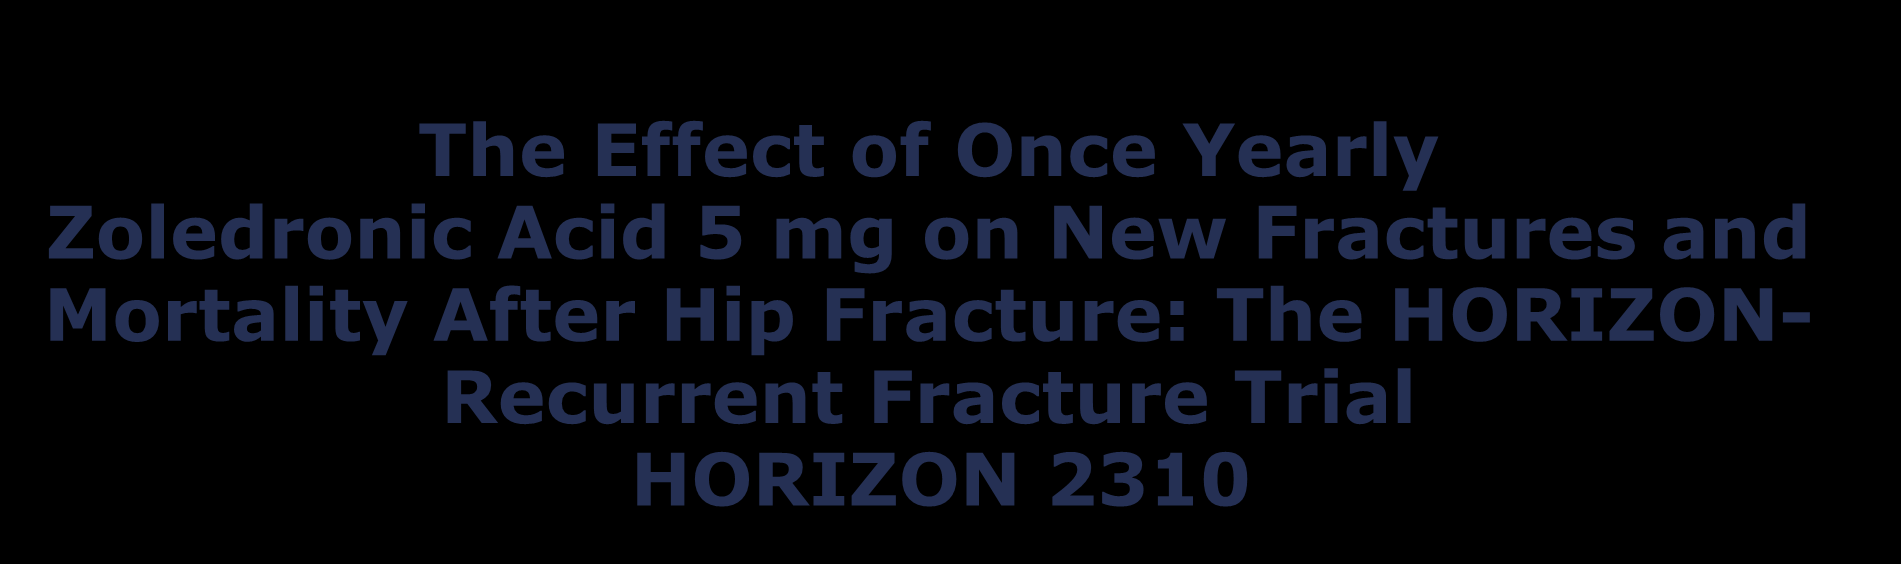 The Effect of Once Yearly Zoledronic Acid 5 mg on New Fractures and